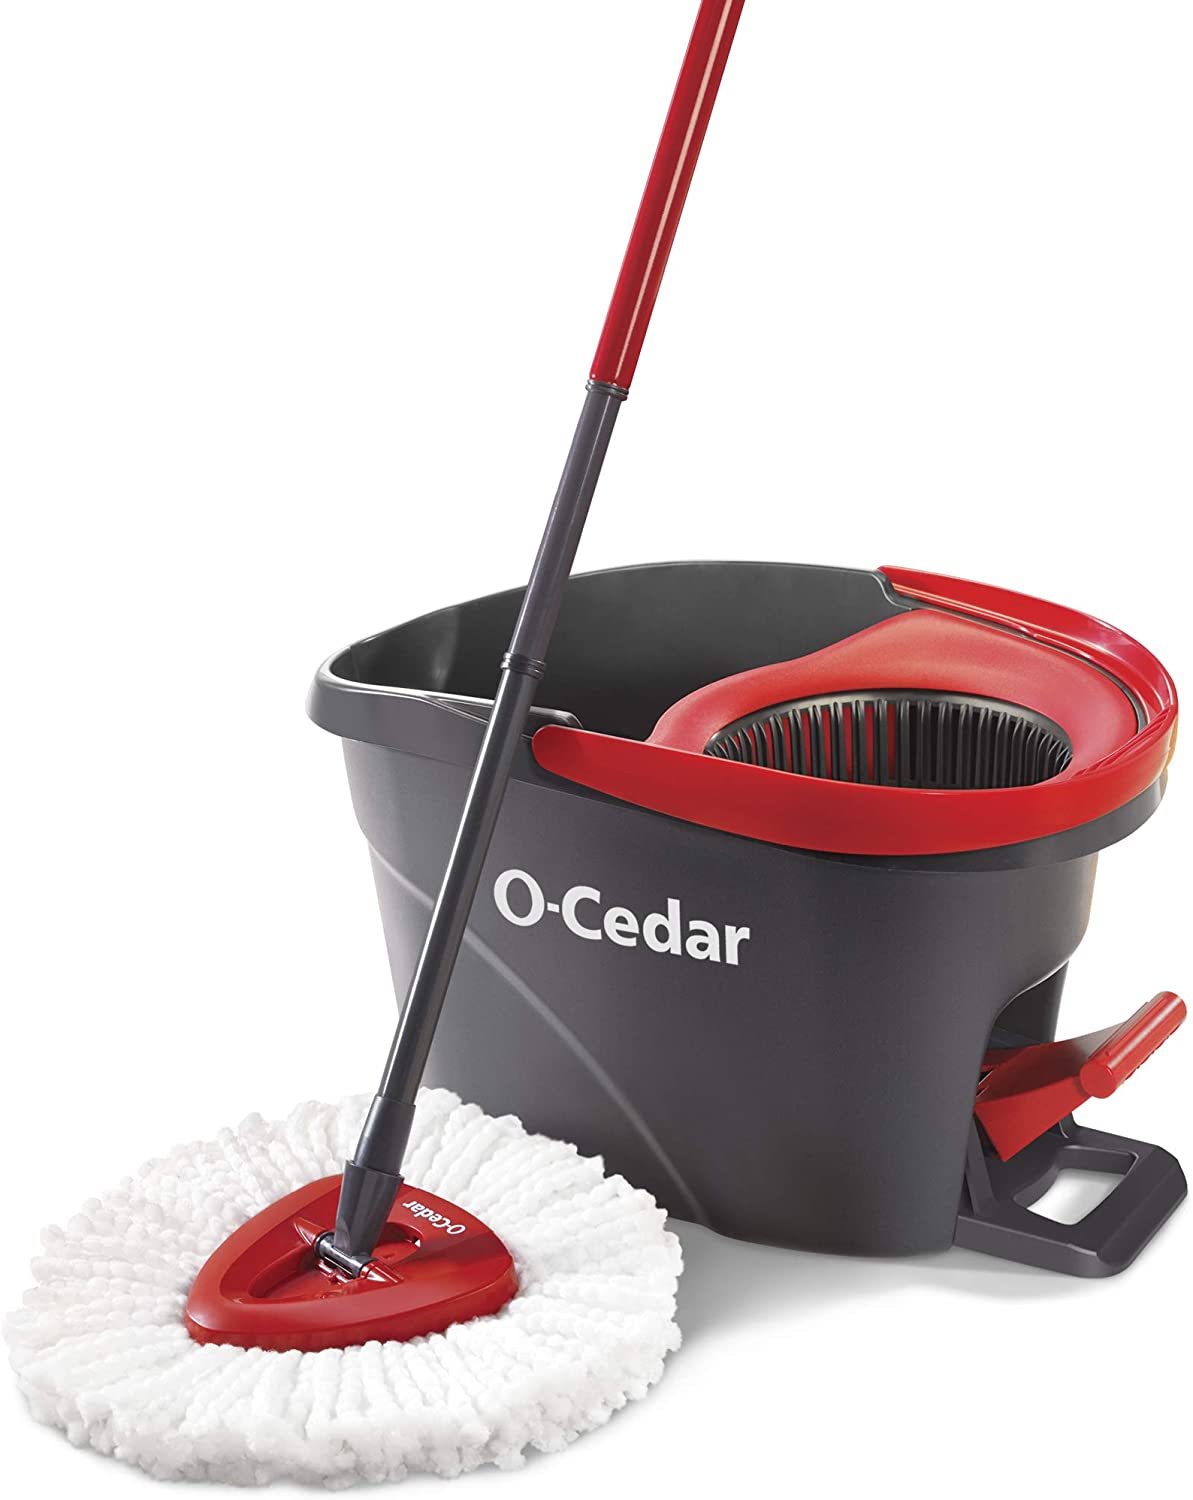 O-Cedar EasyWring Microfiber Spin Mop, Bucket Floor Cleaning System, Red, Gray 12